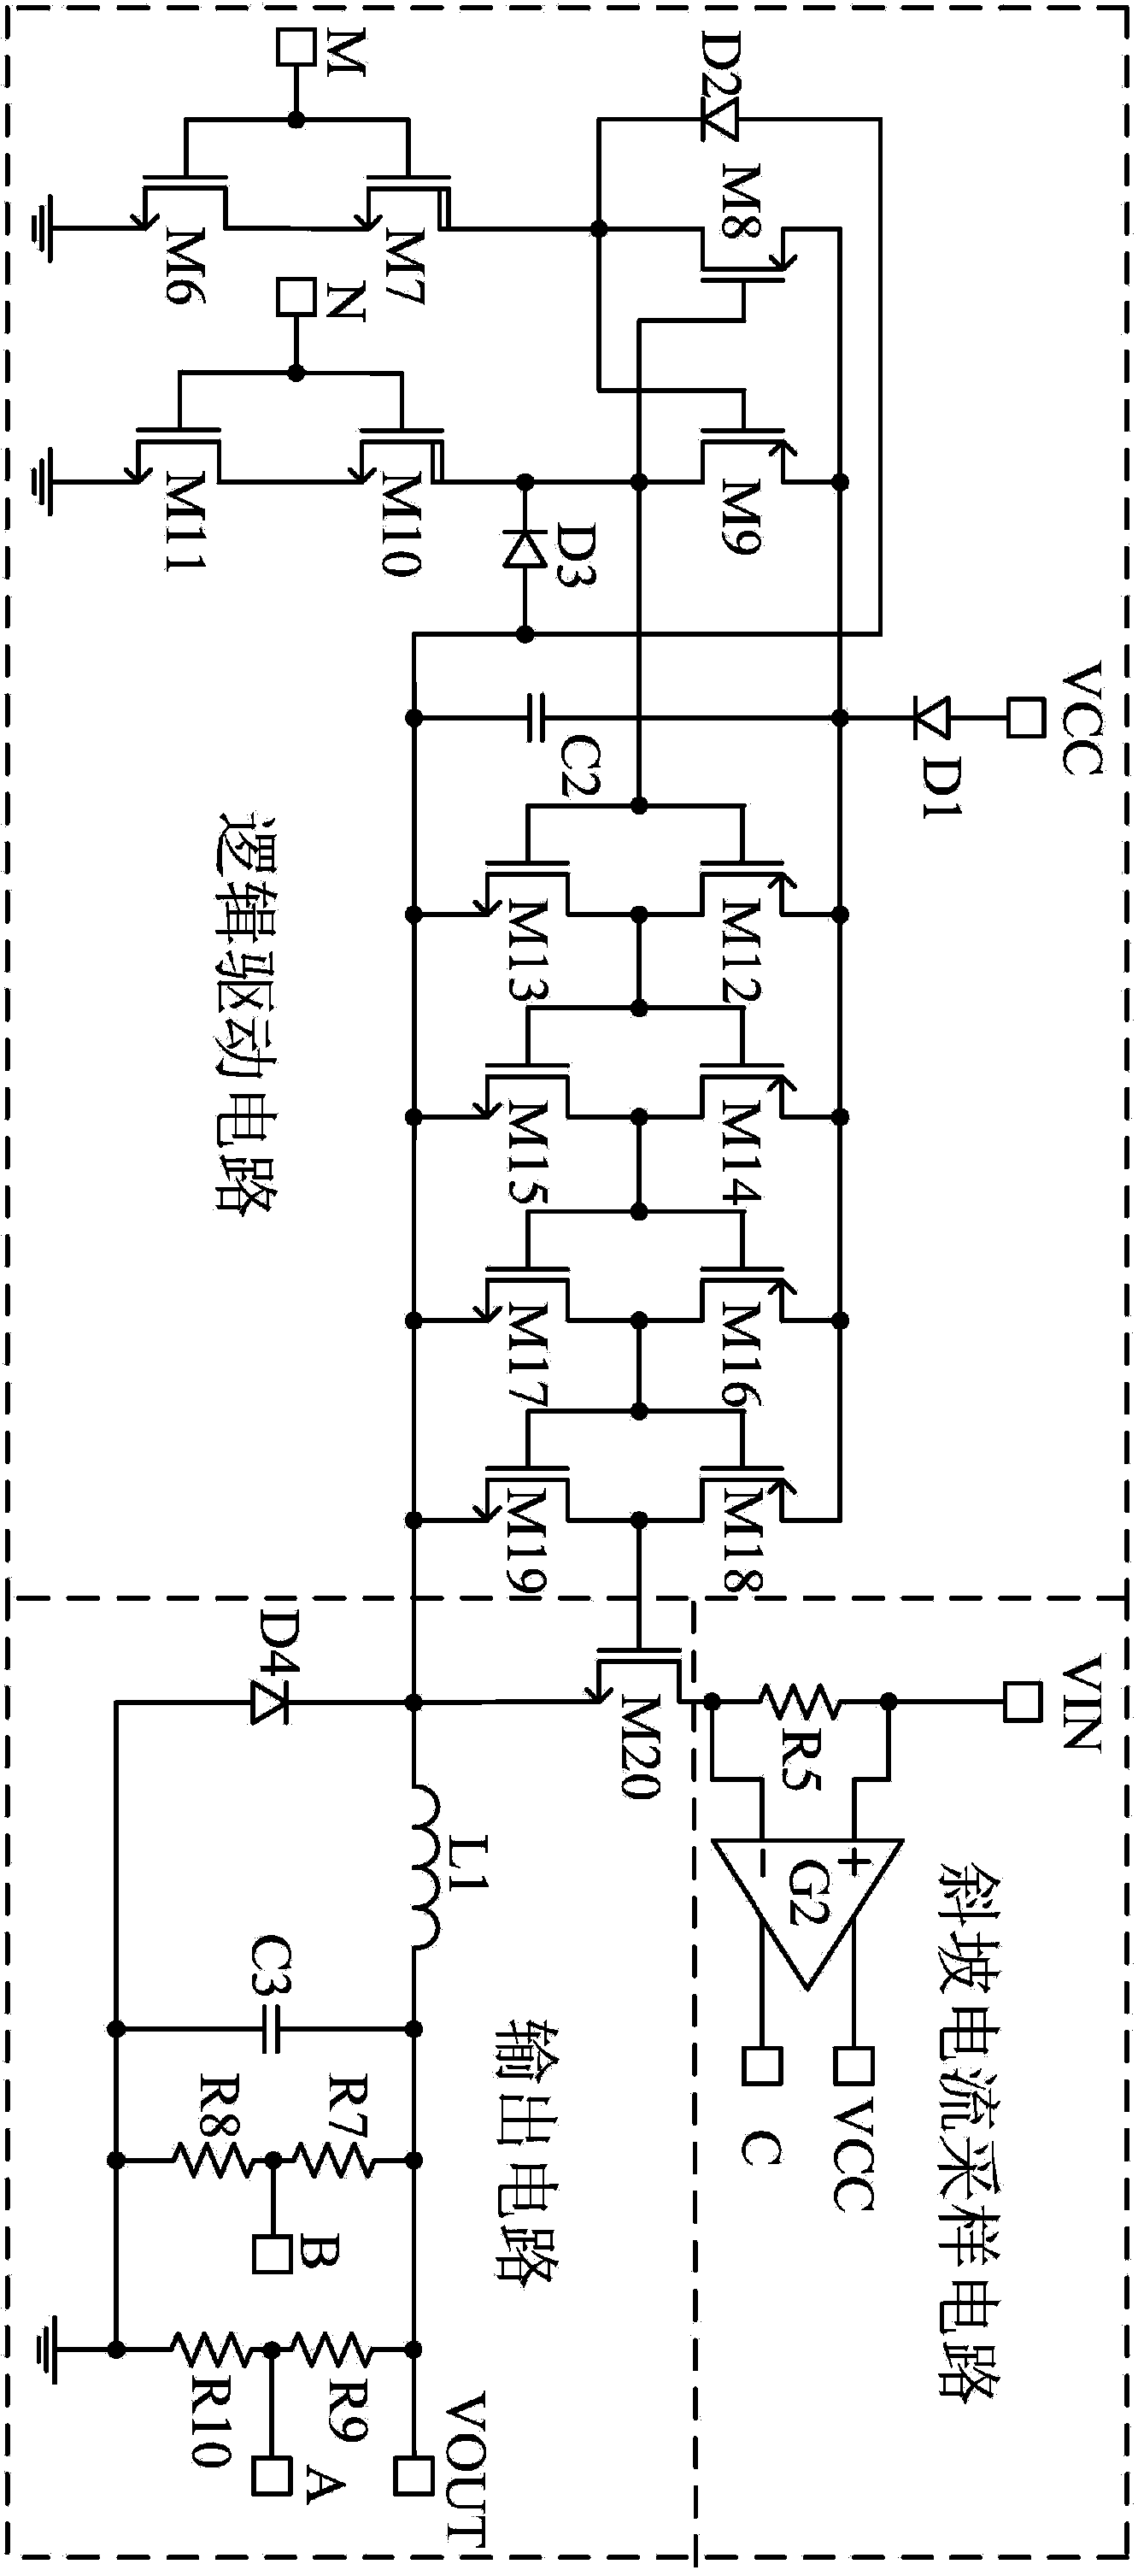 Constant-current/constant-voltage DC-DC conversion system with external adjustable current-limiting function